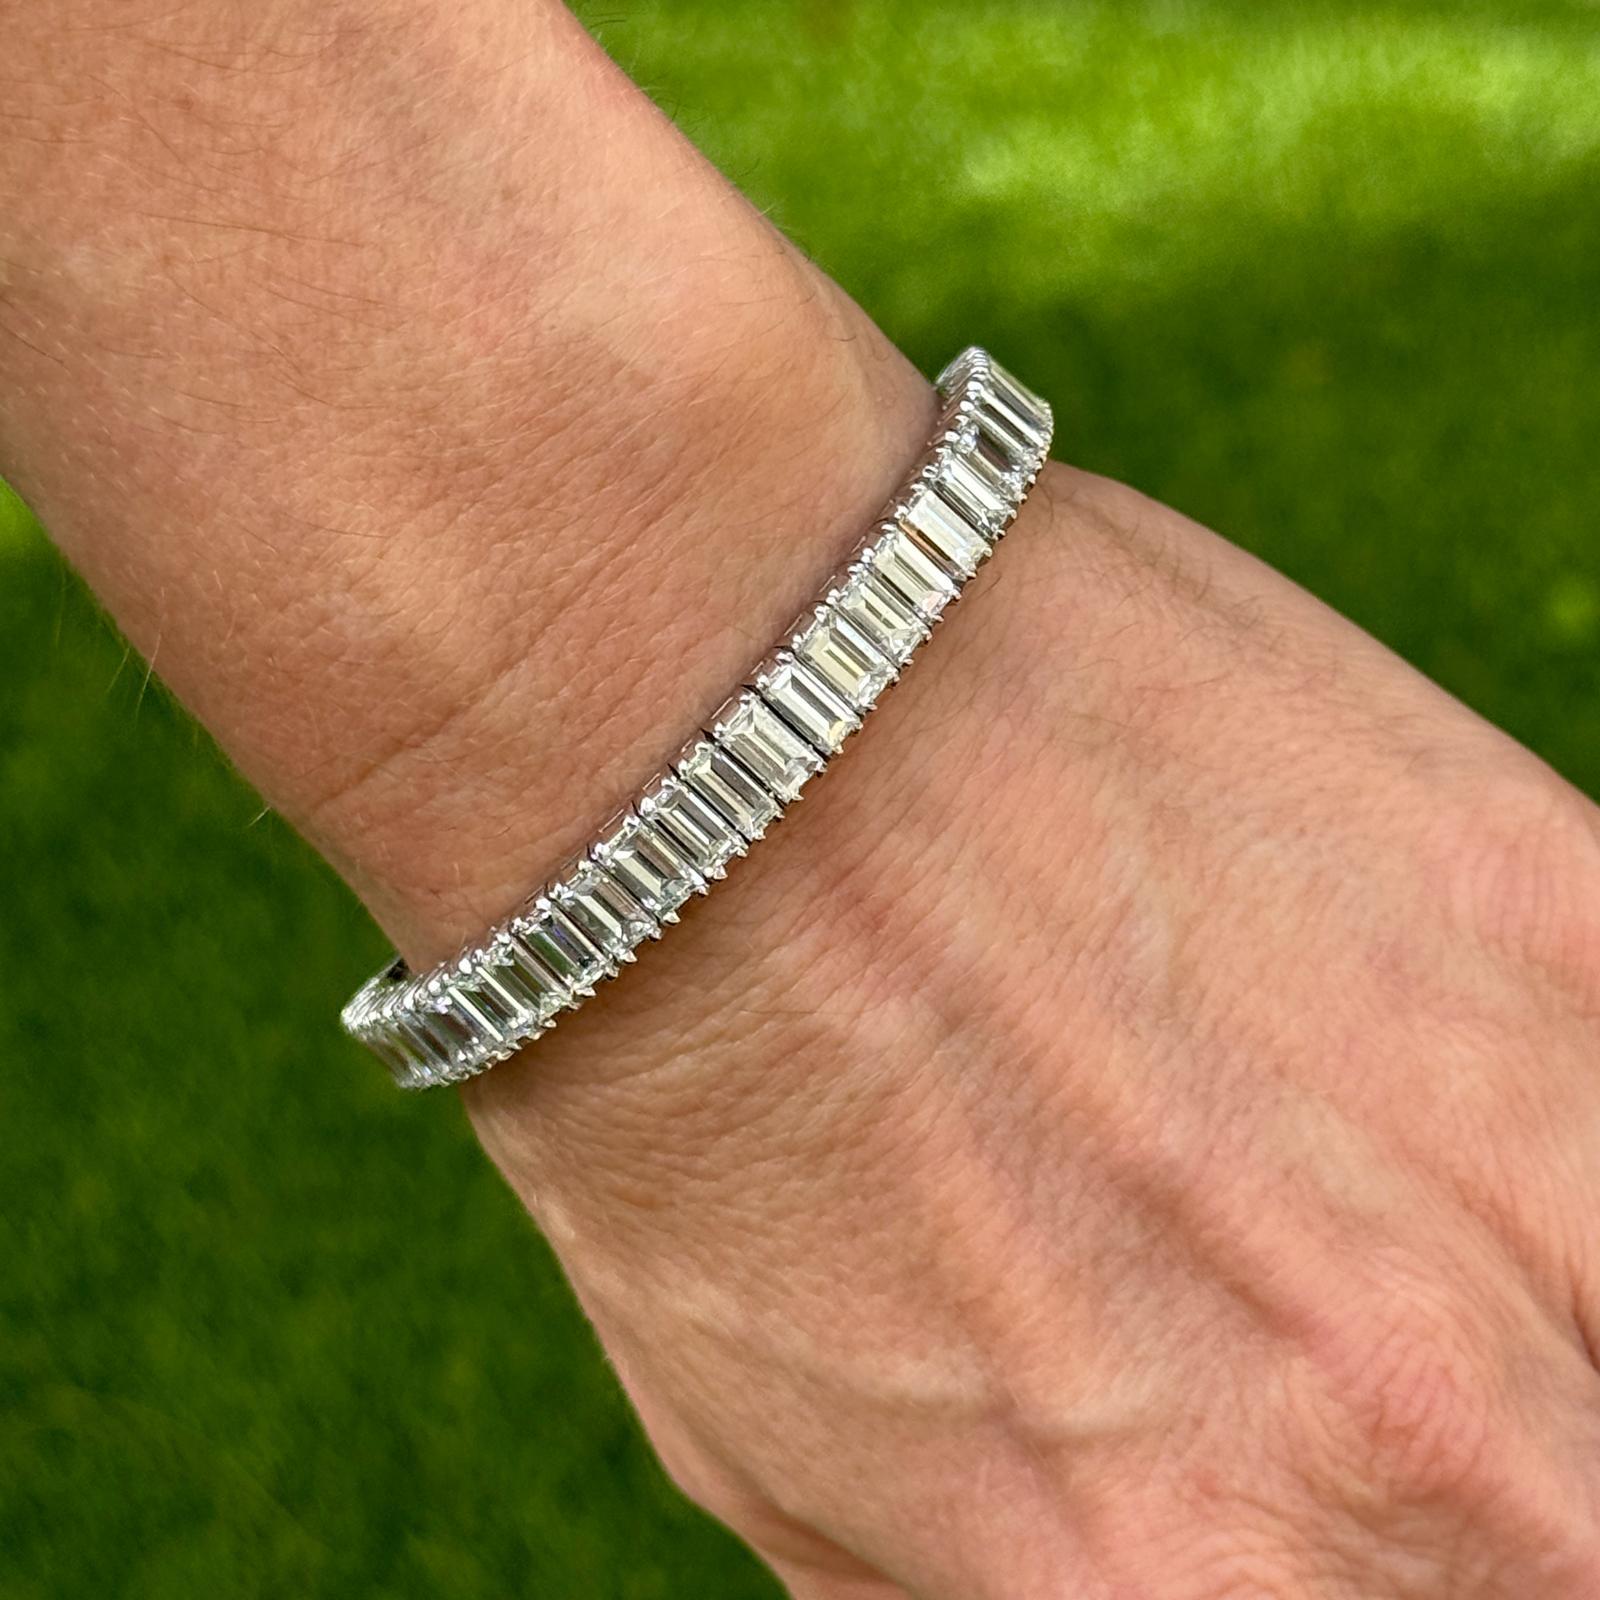 Stunning baguette cut diamond line bracelet handcrafted in platinum. The bracelet features 50 emerald cut high quality diamonds weighing approximately 27.5 carat total weight. The diamonds are graded F-G color and VS clarity. The bracelet measures 7